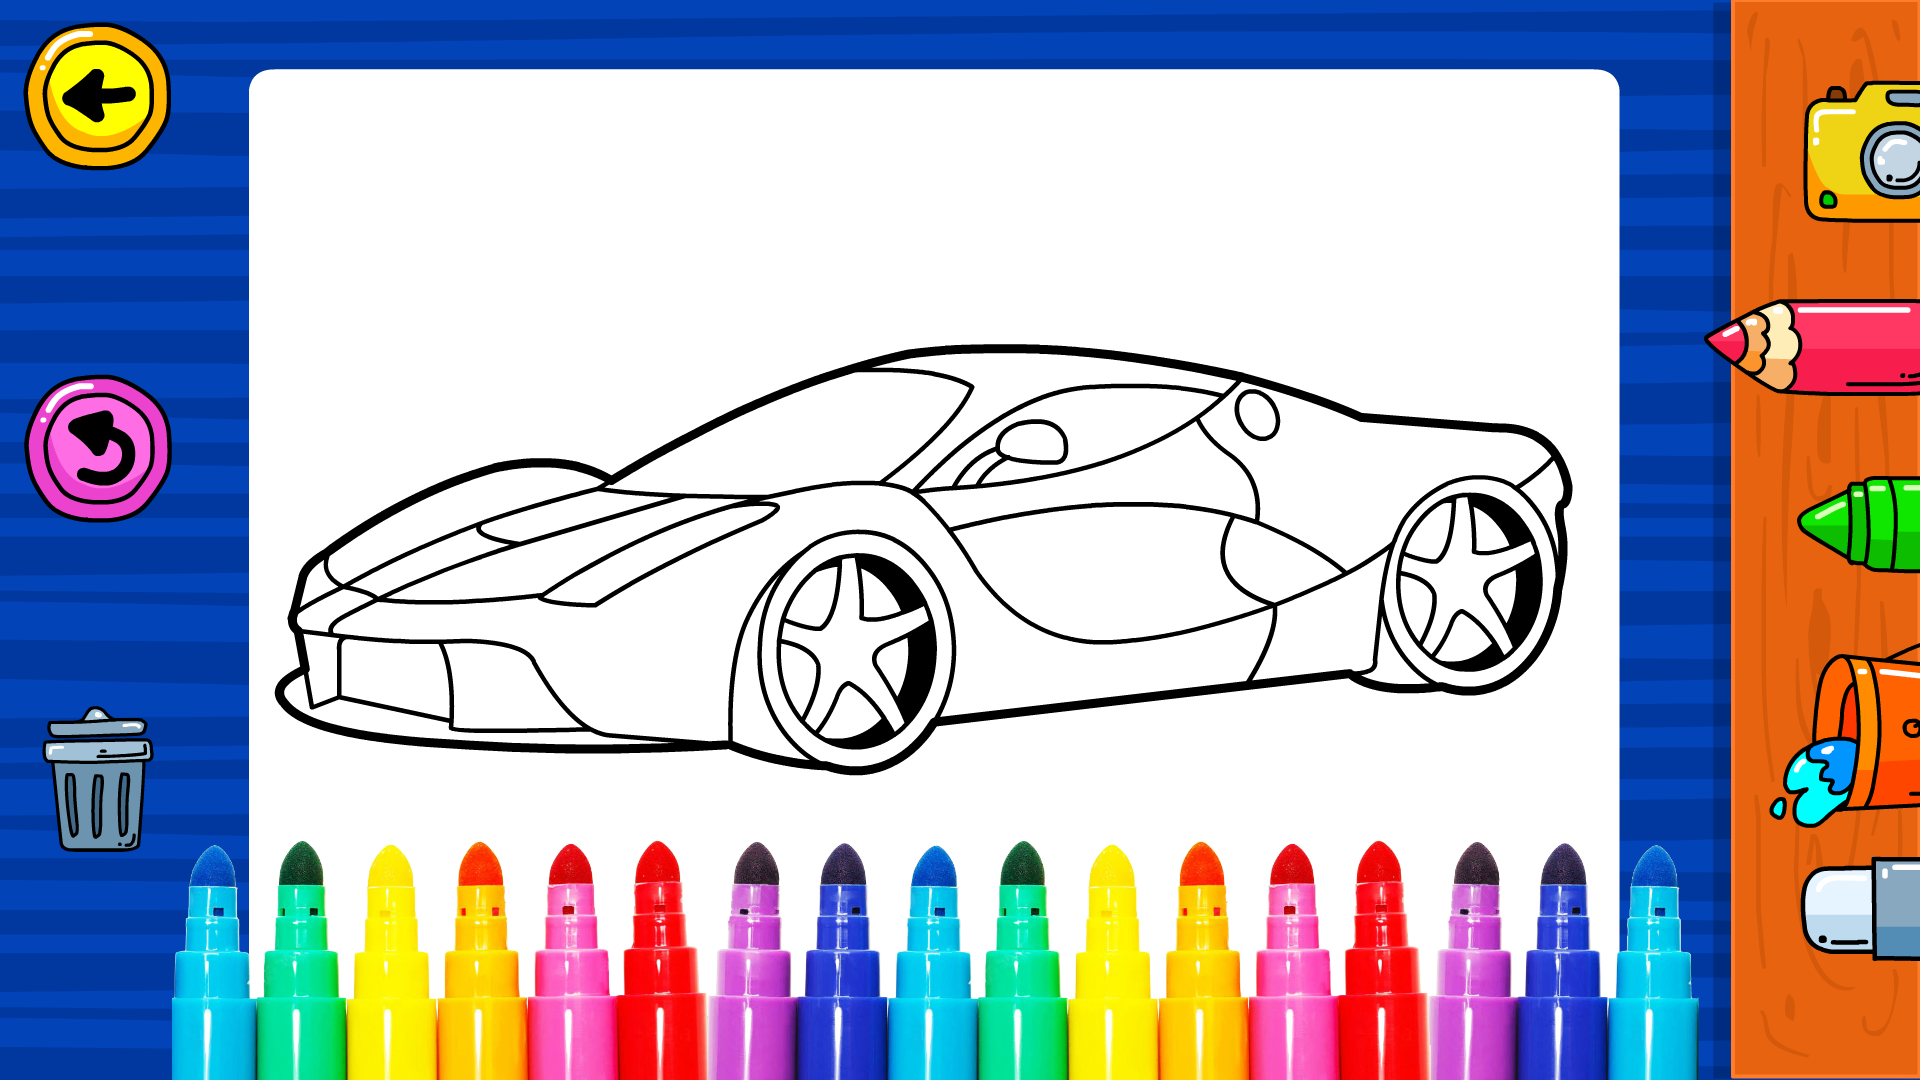 How To Draw A Car Easy Step By Step , Car Drawing Easy For Kids - YouTube-saigonsouth.com.vn